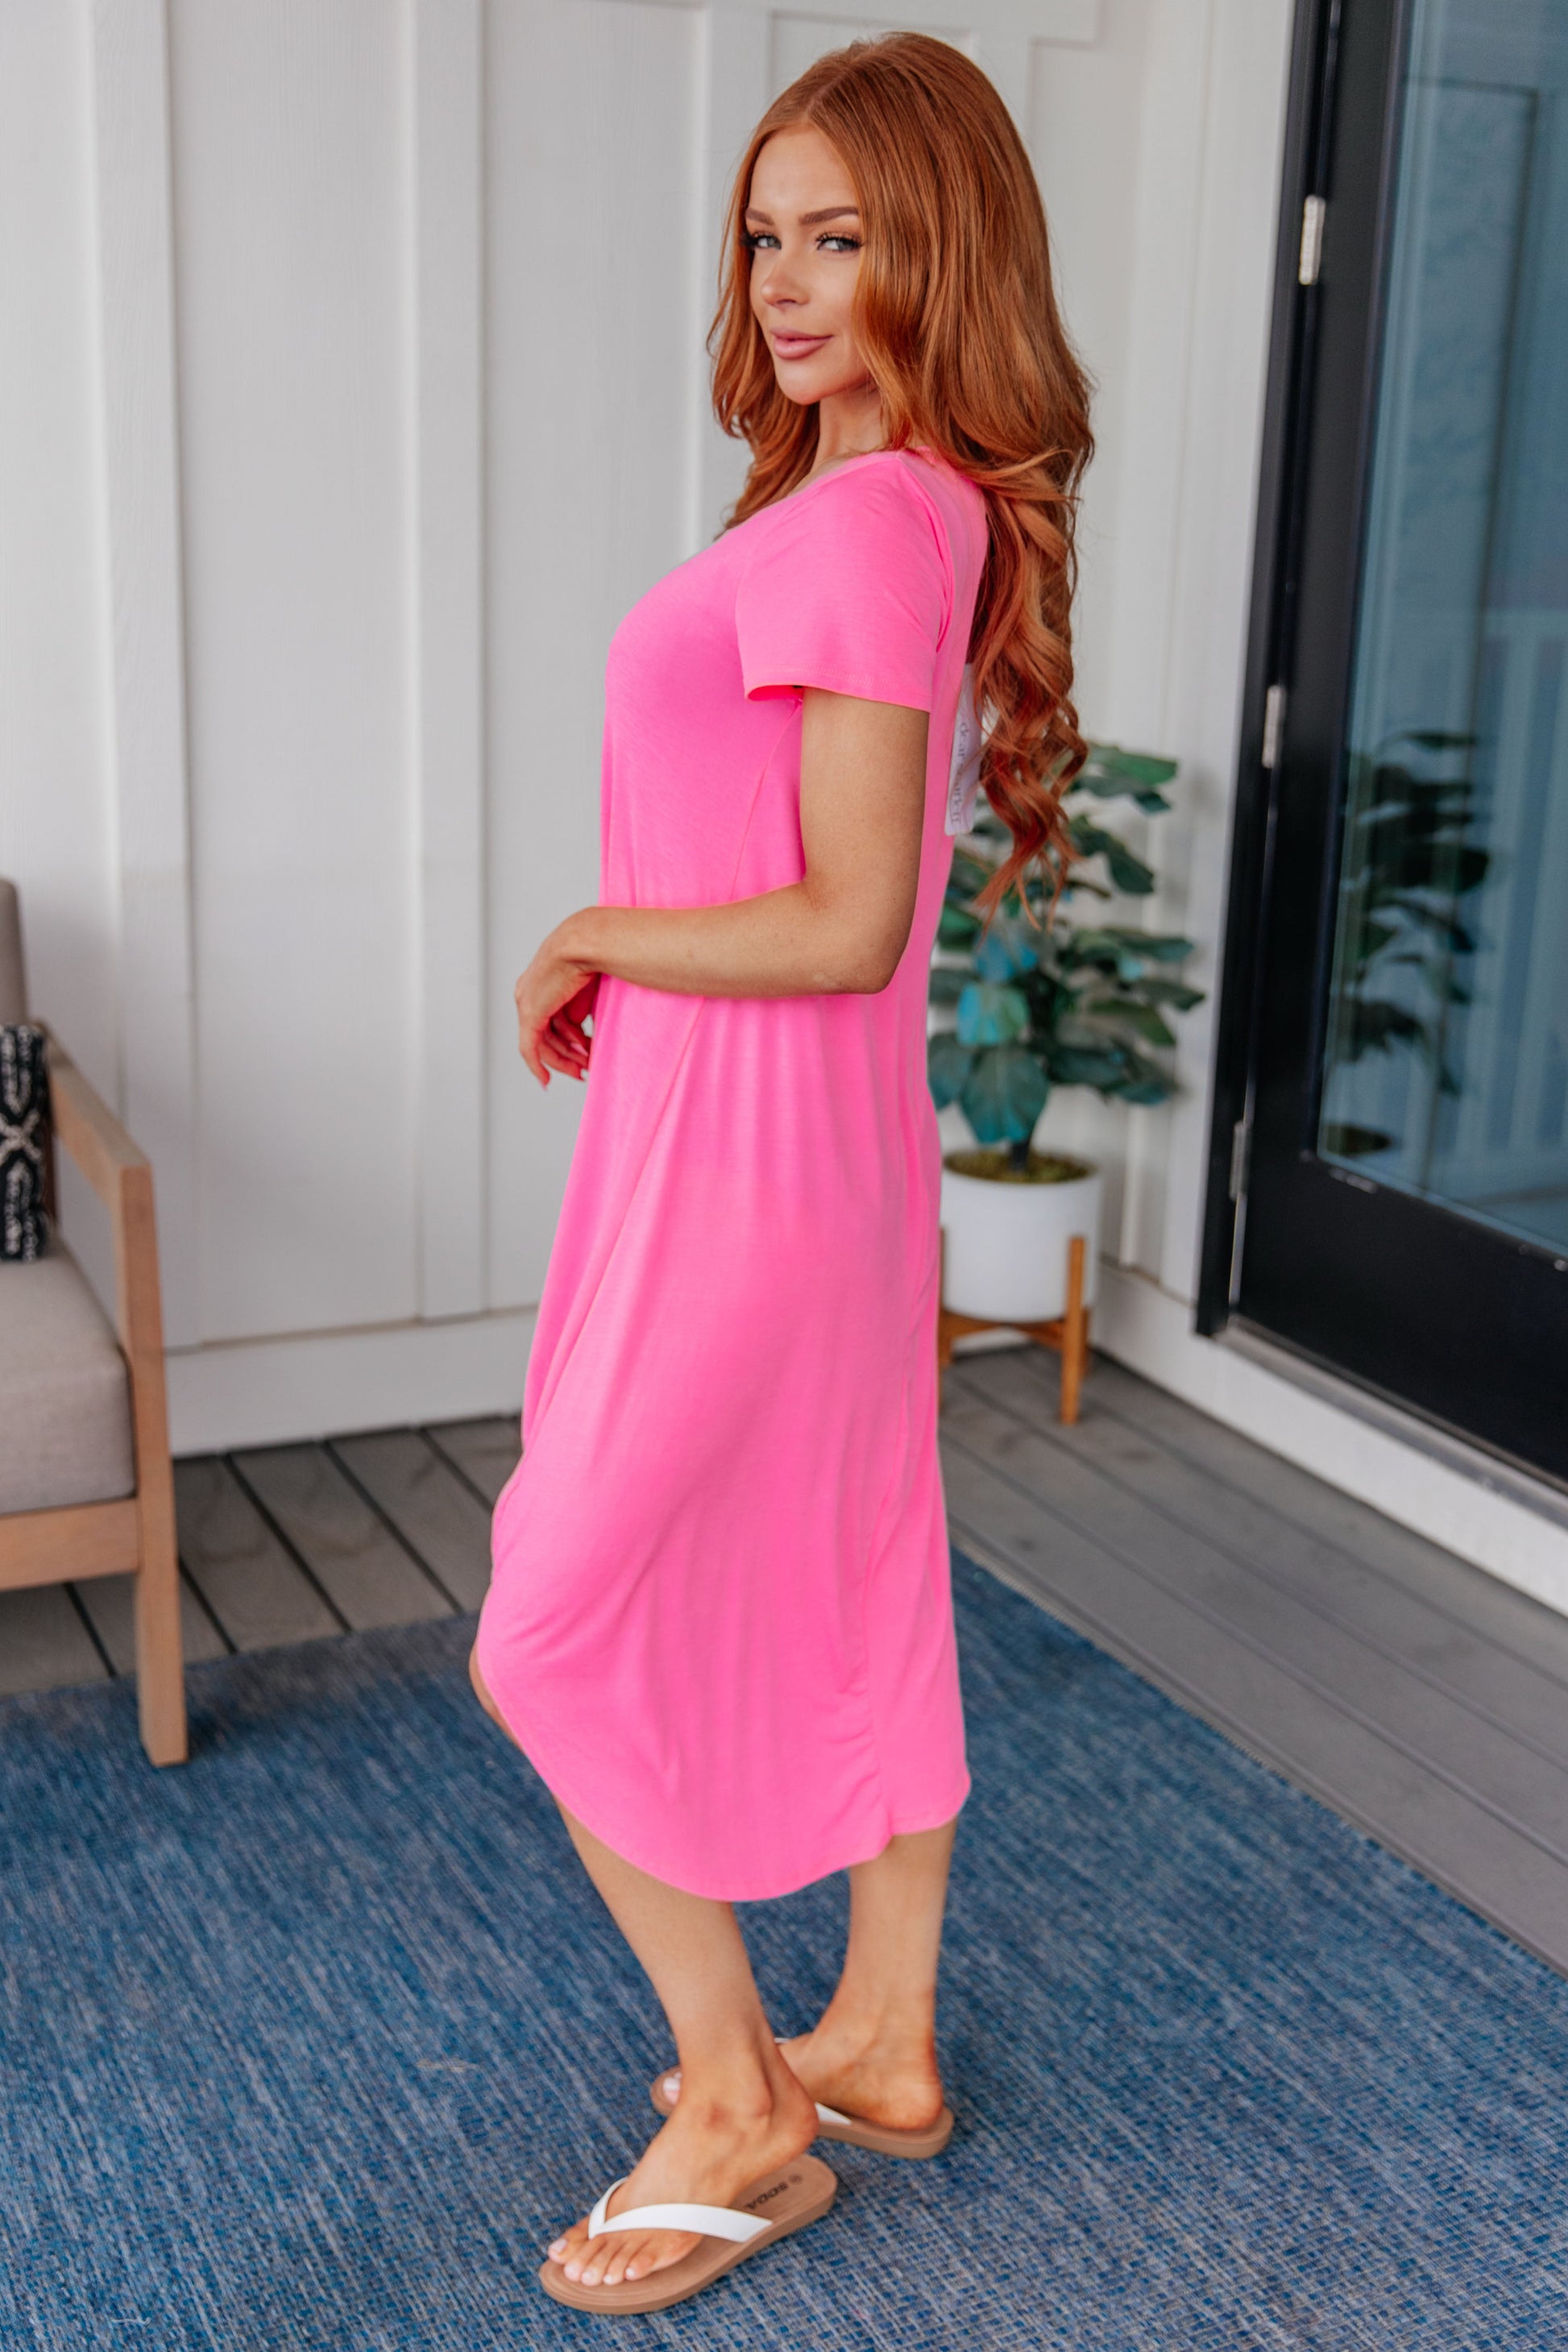 Dolman Sleeve Maxi Dress in Neon Pink-Dresses-Ave Shops-Happy Campers Boutique, Women's Fashion and More in Plainwell, MI